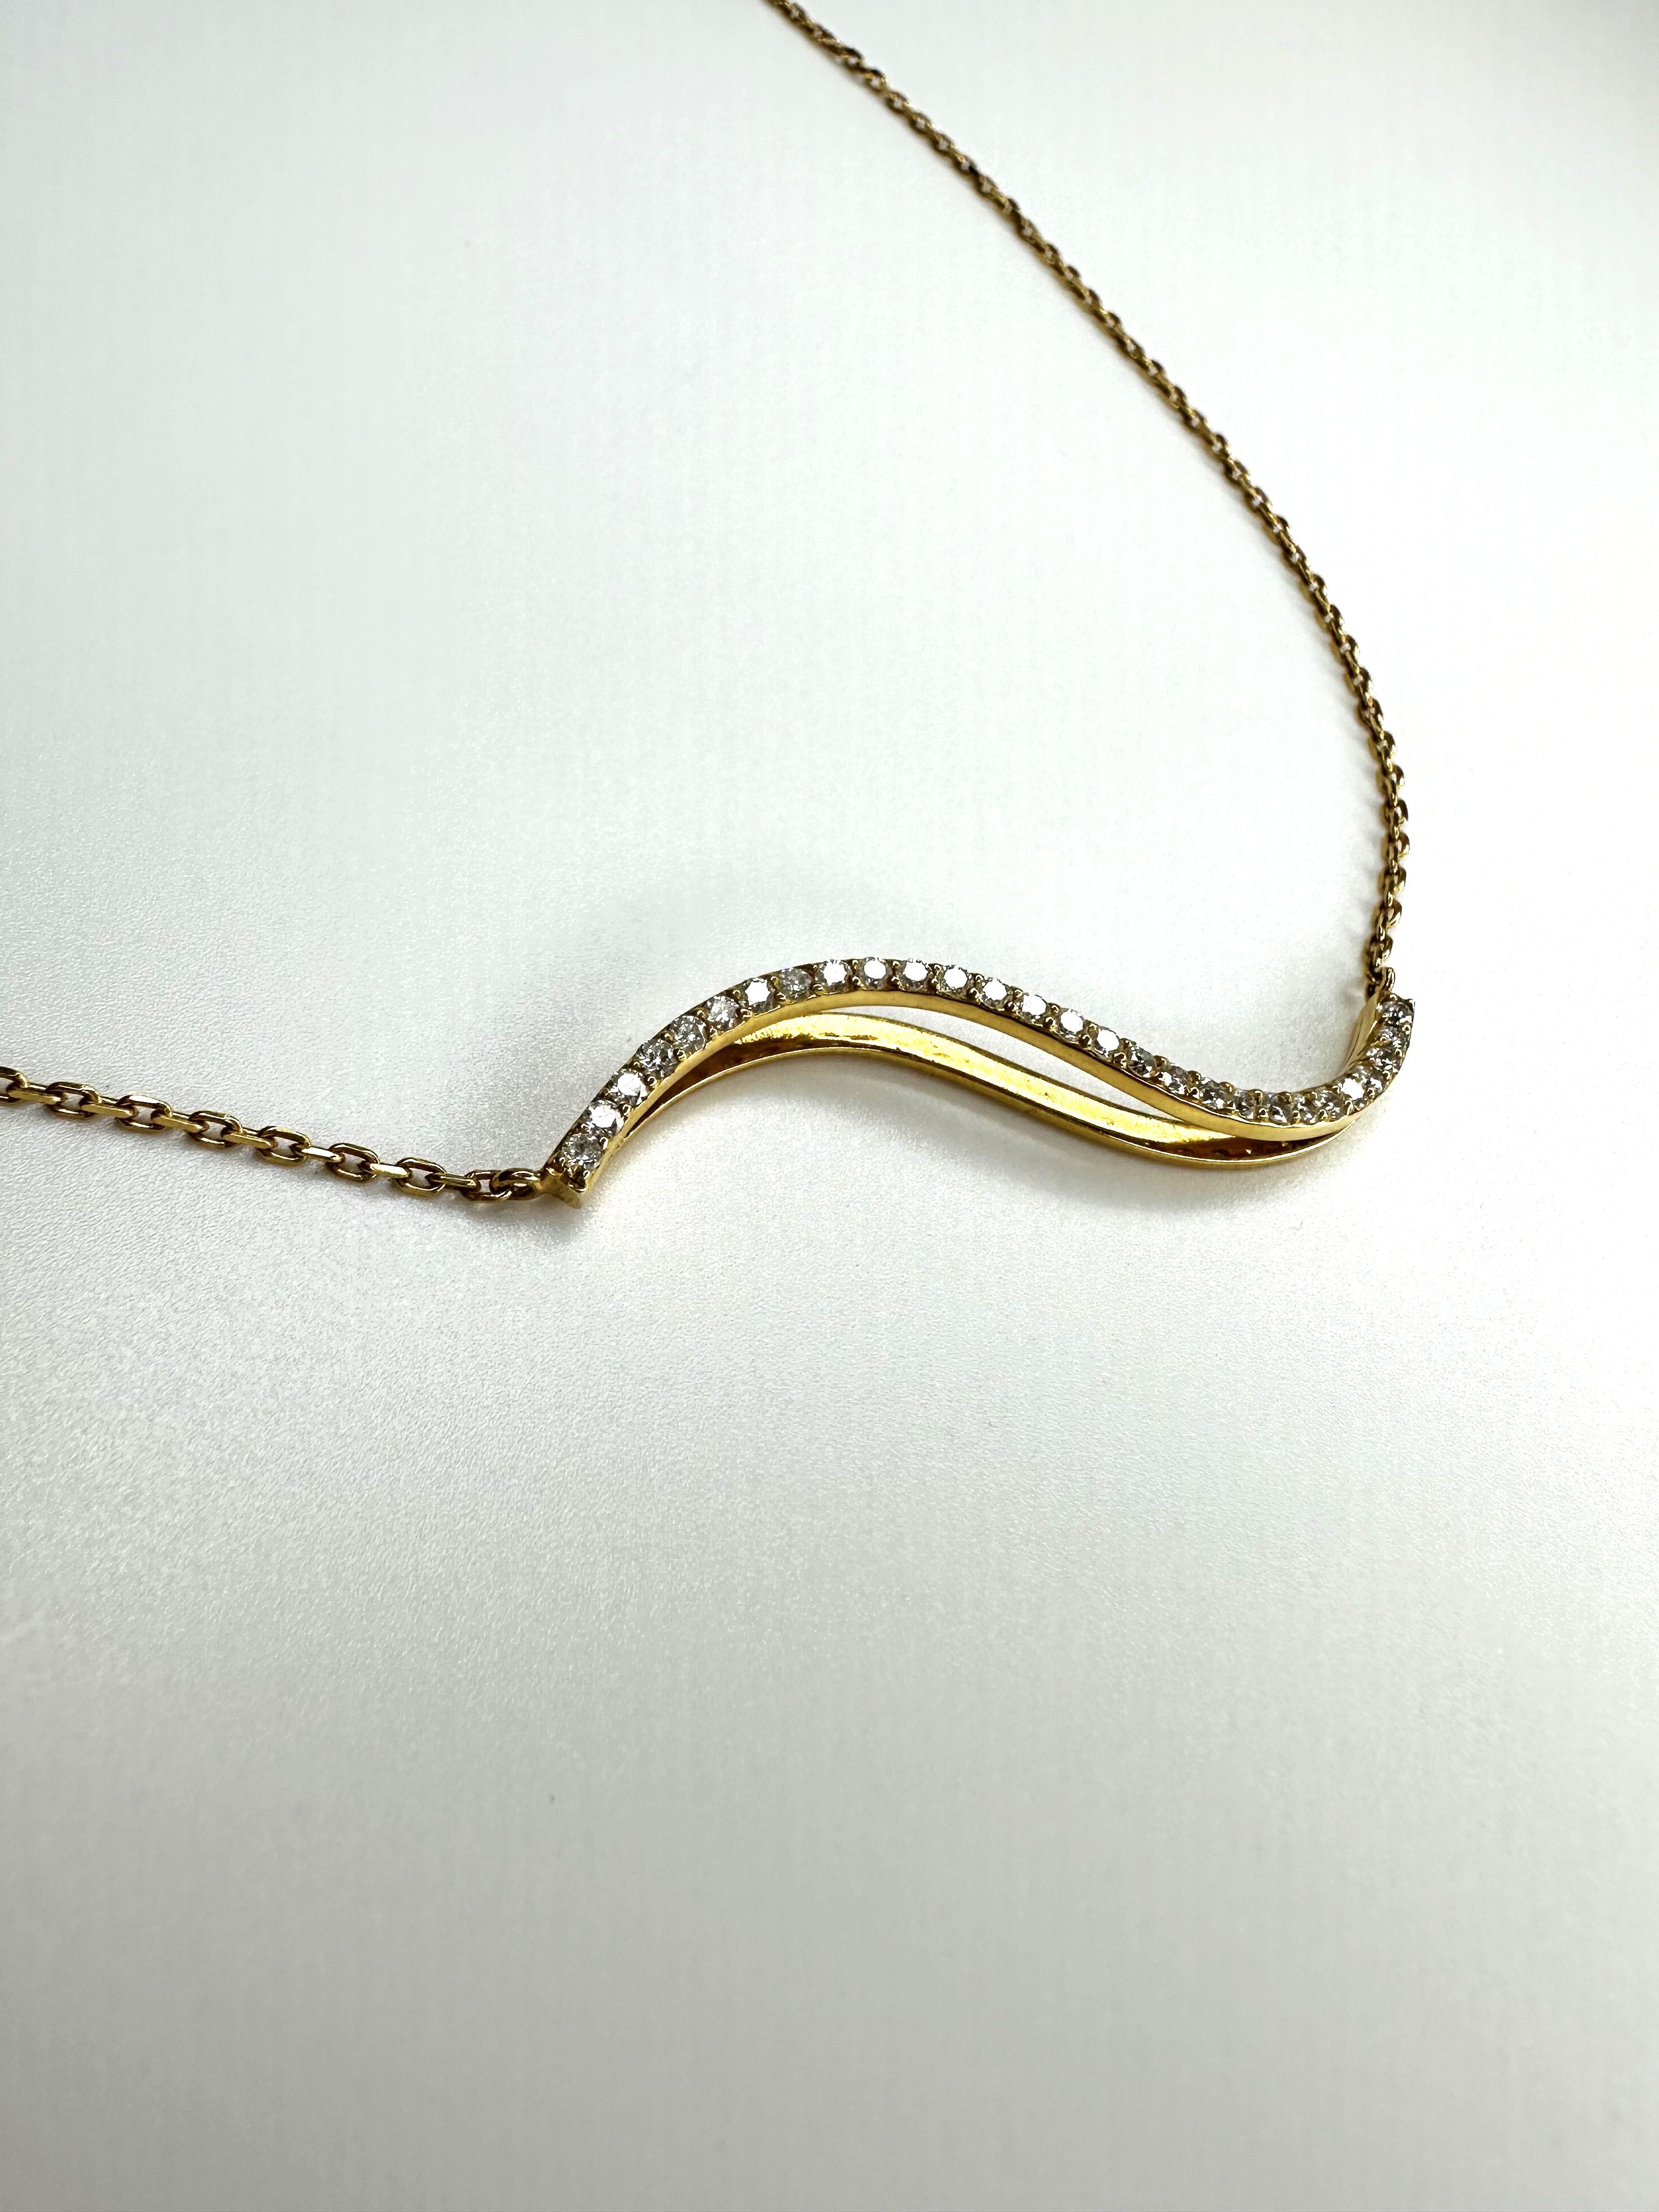 Contemporary Gold and Diamonds Necklace For Sale